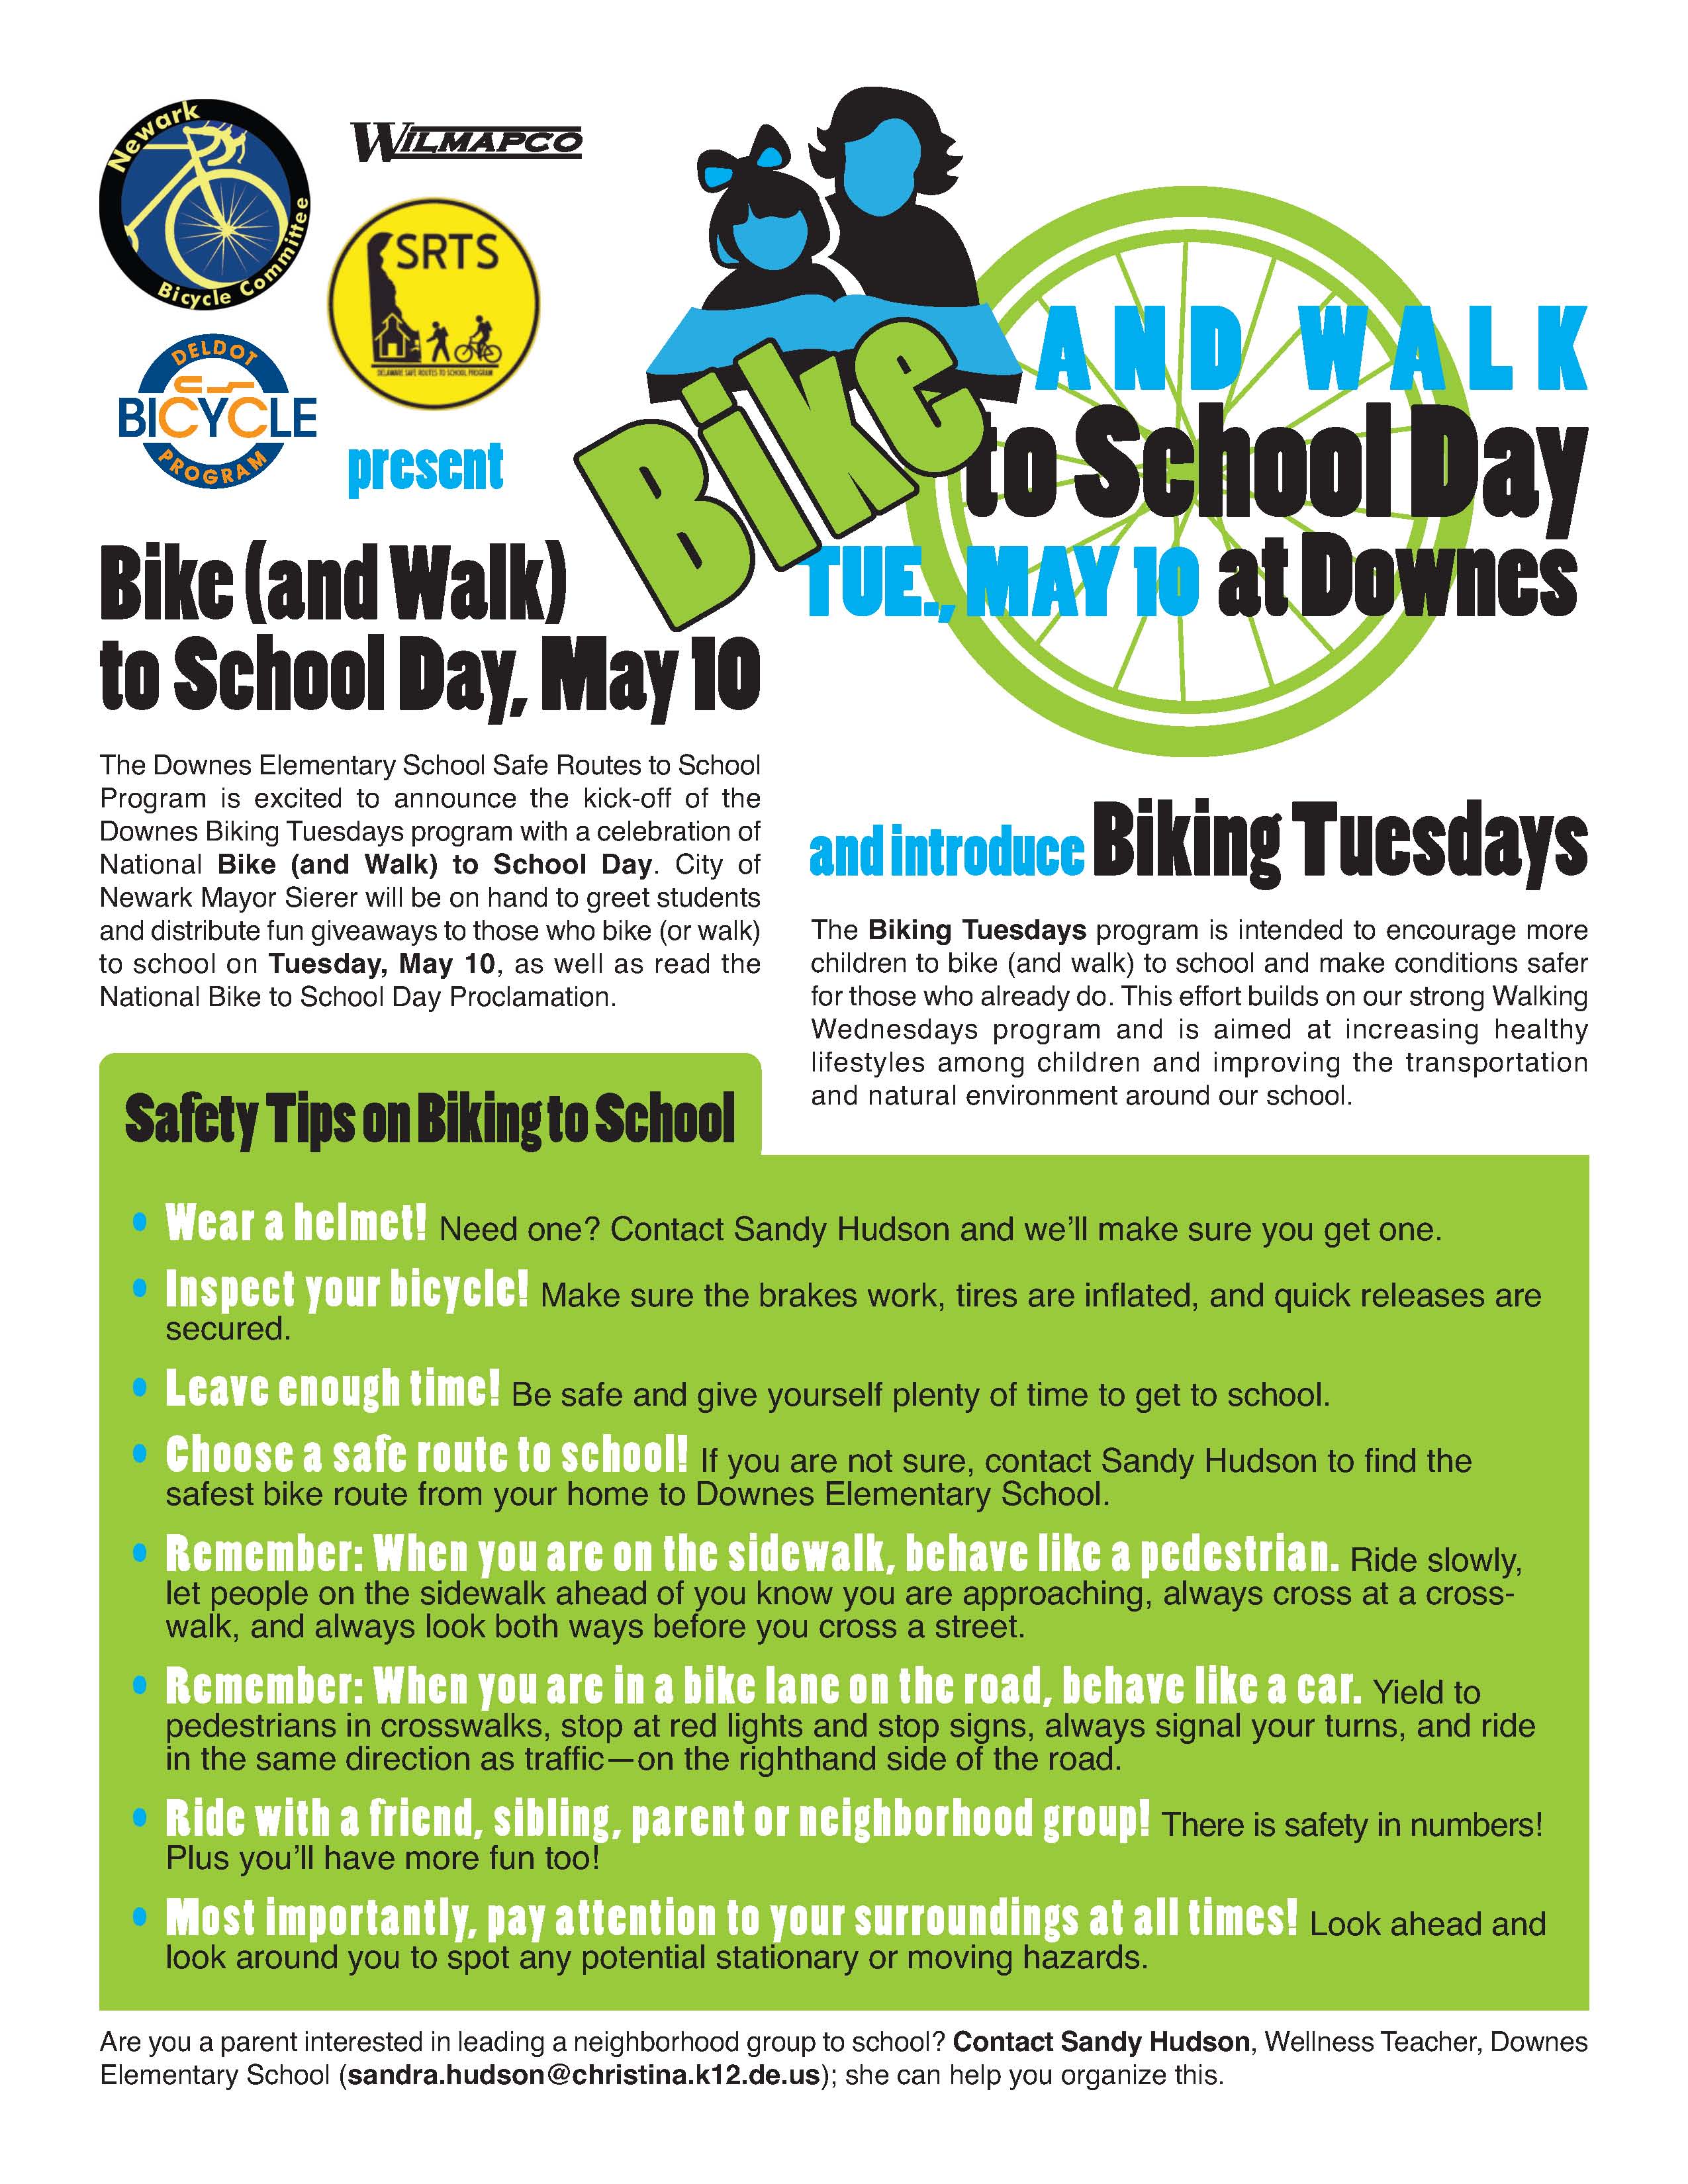 Bike (and Walk) to School Day, May 10 The Downes Elementary School Safe Routes to School Program is excited to announce the kick-off of the Downes Biking Tuesdays program with a celebration of National Bike (and Walk) to School Day. City of Newark Mayor Sierer will be on hand to greet students and distribute fun giveaways to those who bike (or walk) to school on Tuesday, May 10, as well as read the National Bike to School Day Proclamation. The Biking Tuesdays program is intended to encourage more children to bike (and walk) to school and make conditions safer for those who already do. This effort builds on our strong Walking Wednesdays program and is aimed at increasing healthy lifestyles among children and improving the transportation and natural environment around our school.